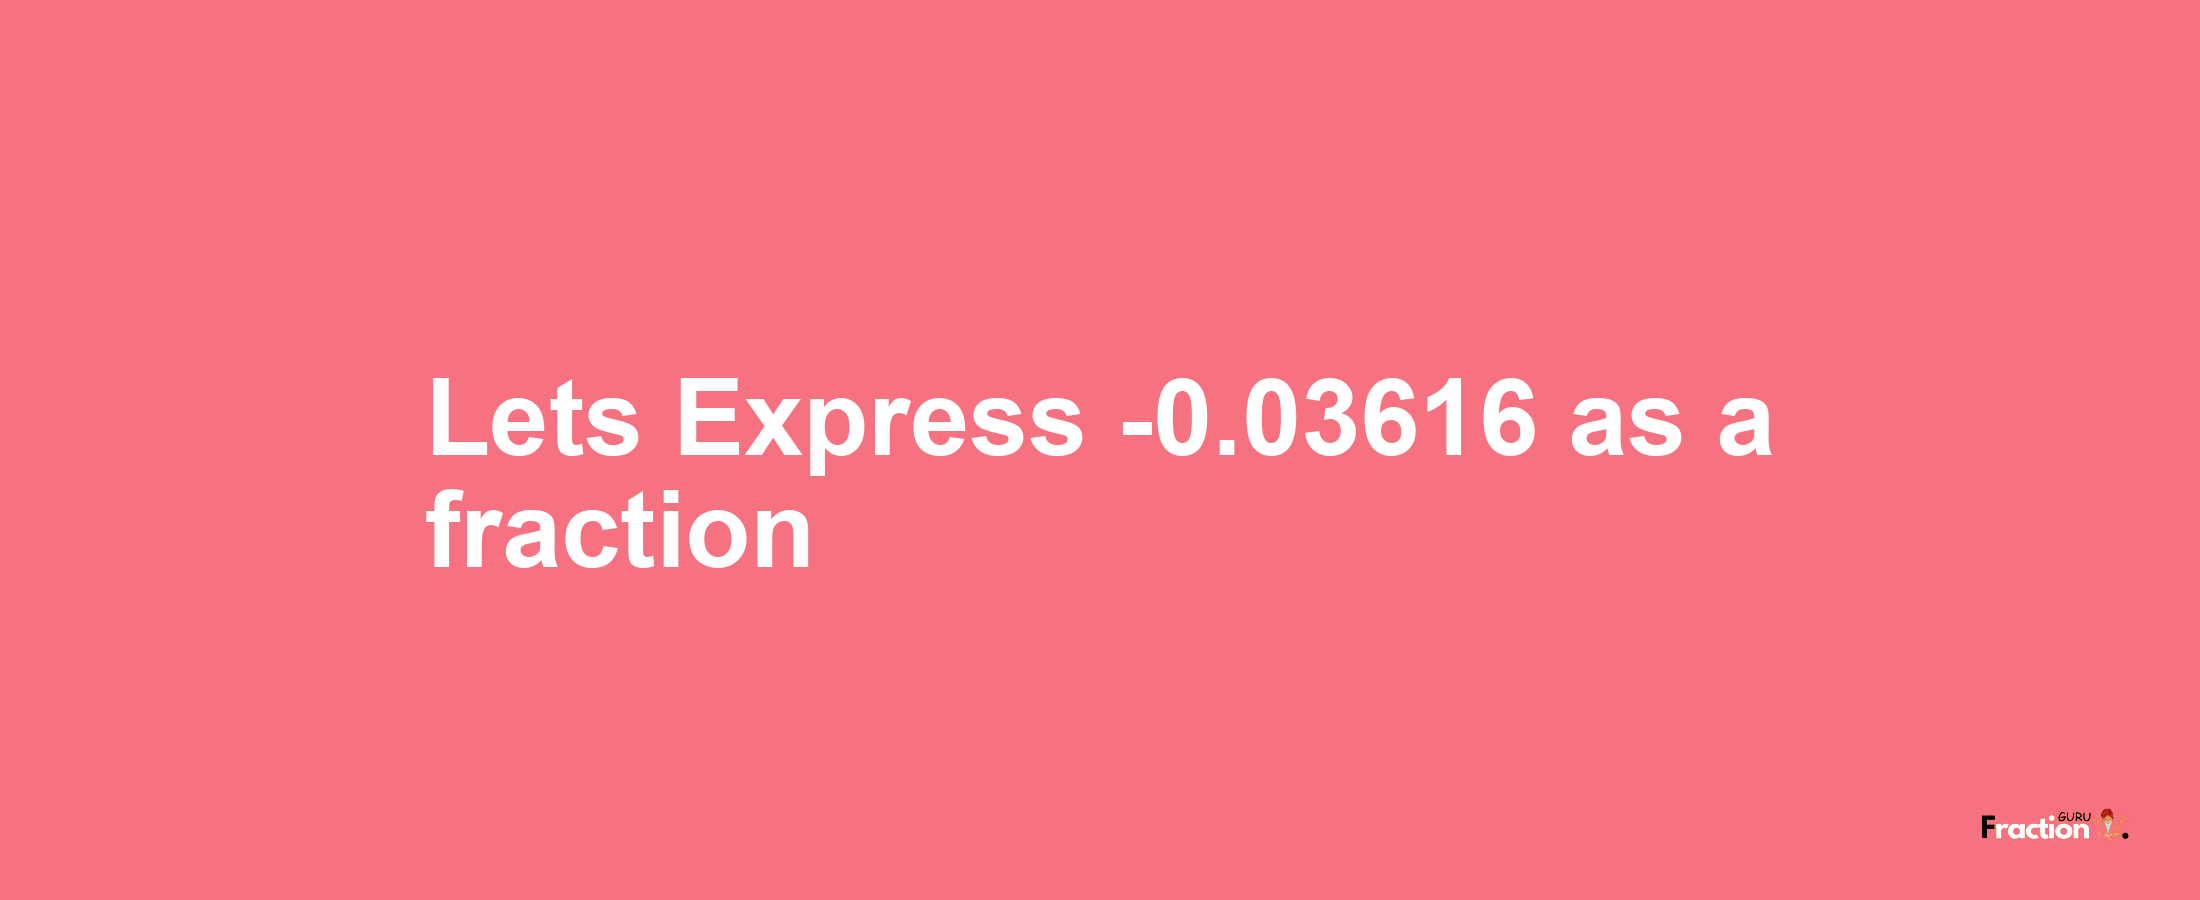 Lets Express -0.03616 as afraction